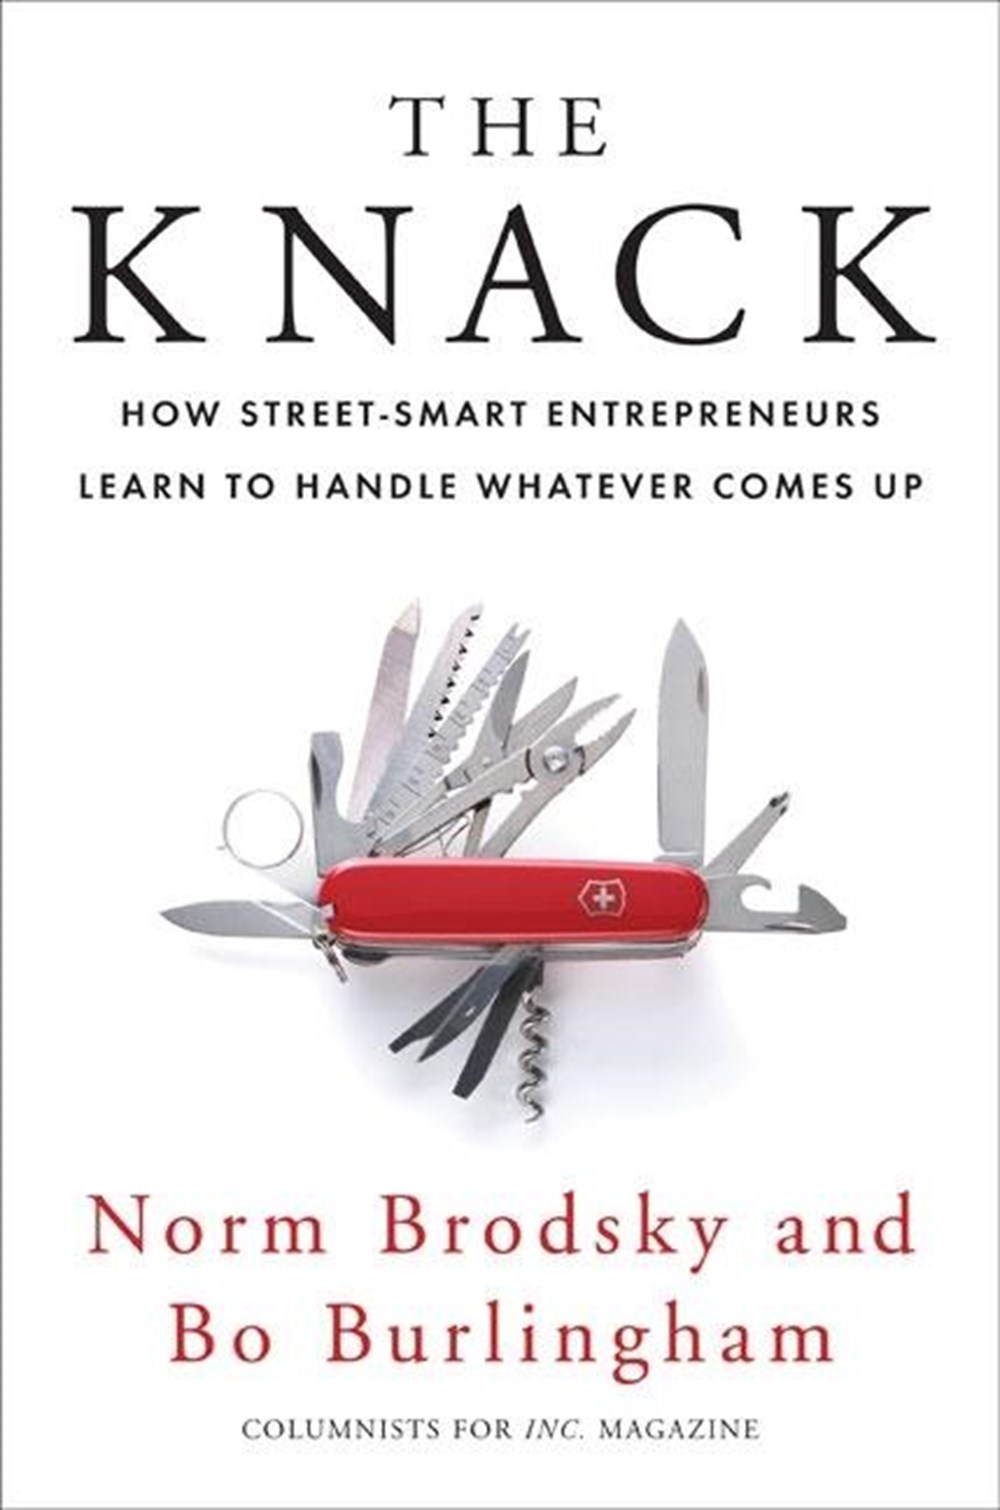 Knack How Street-Smart Entrepreneurs Learn to Handle Whatever Comes Up